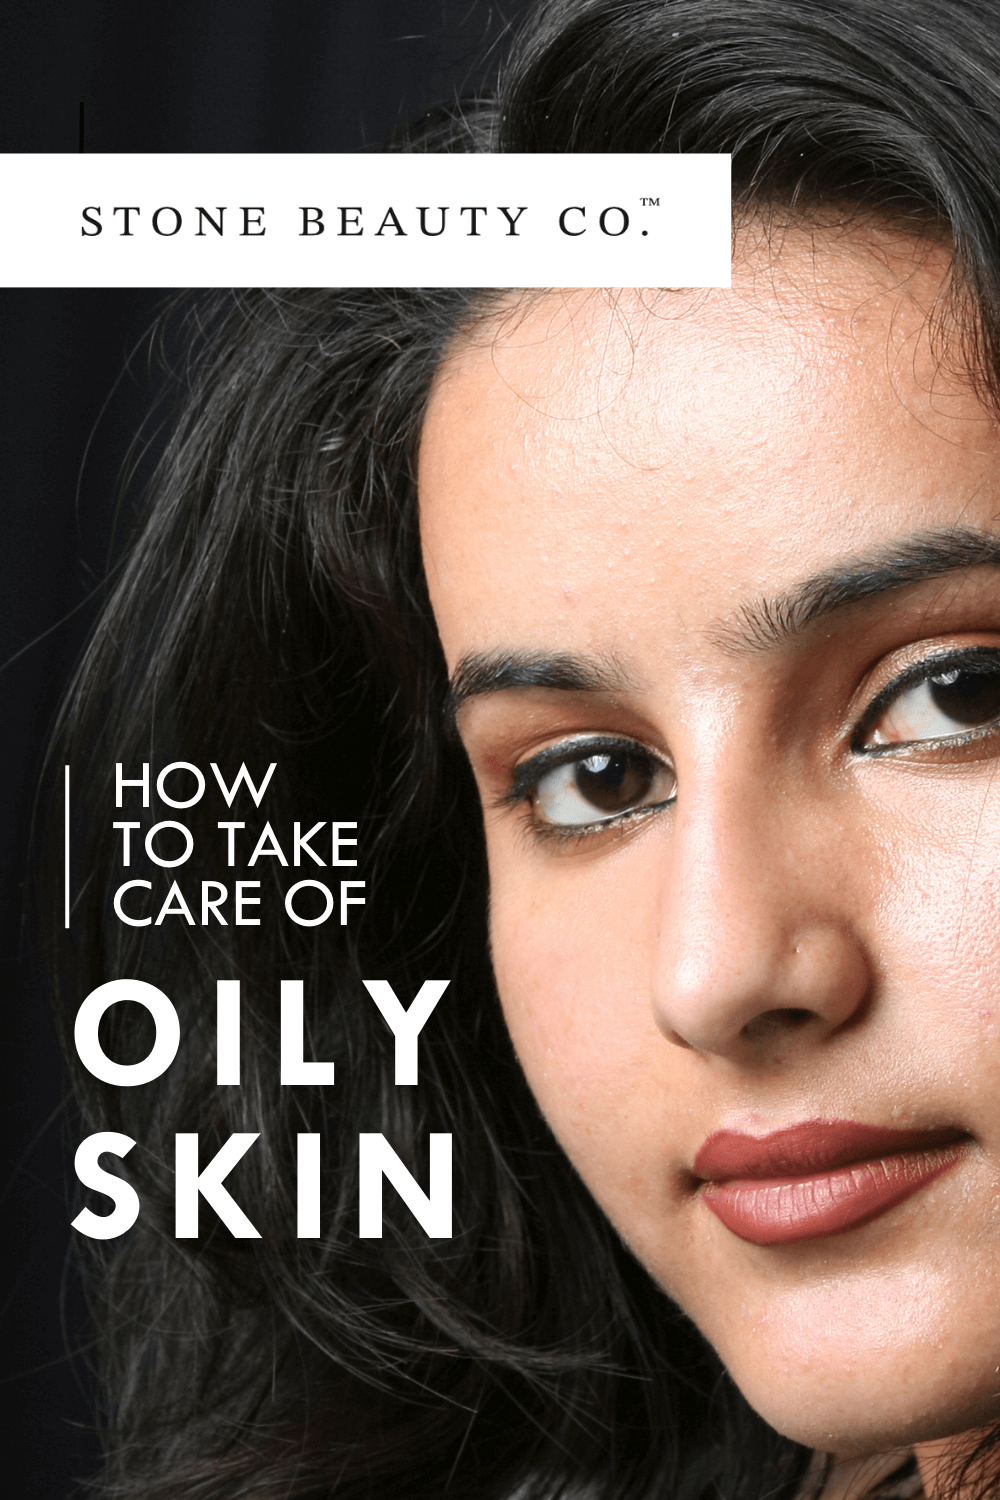 Crush Oily Skin Care with These Super Tips!